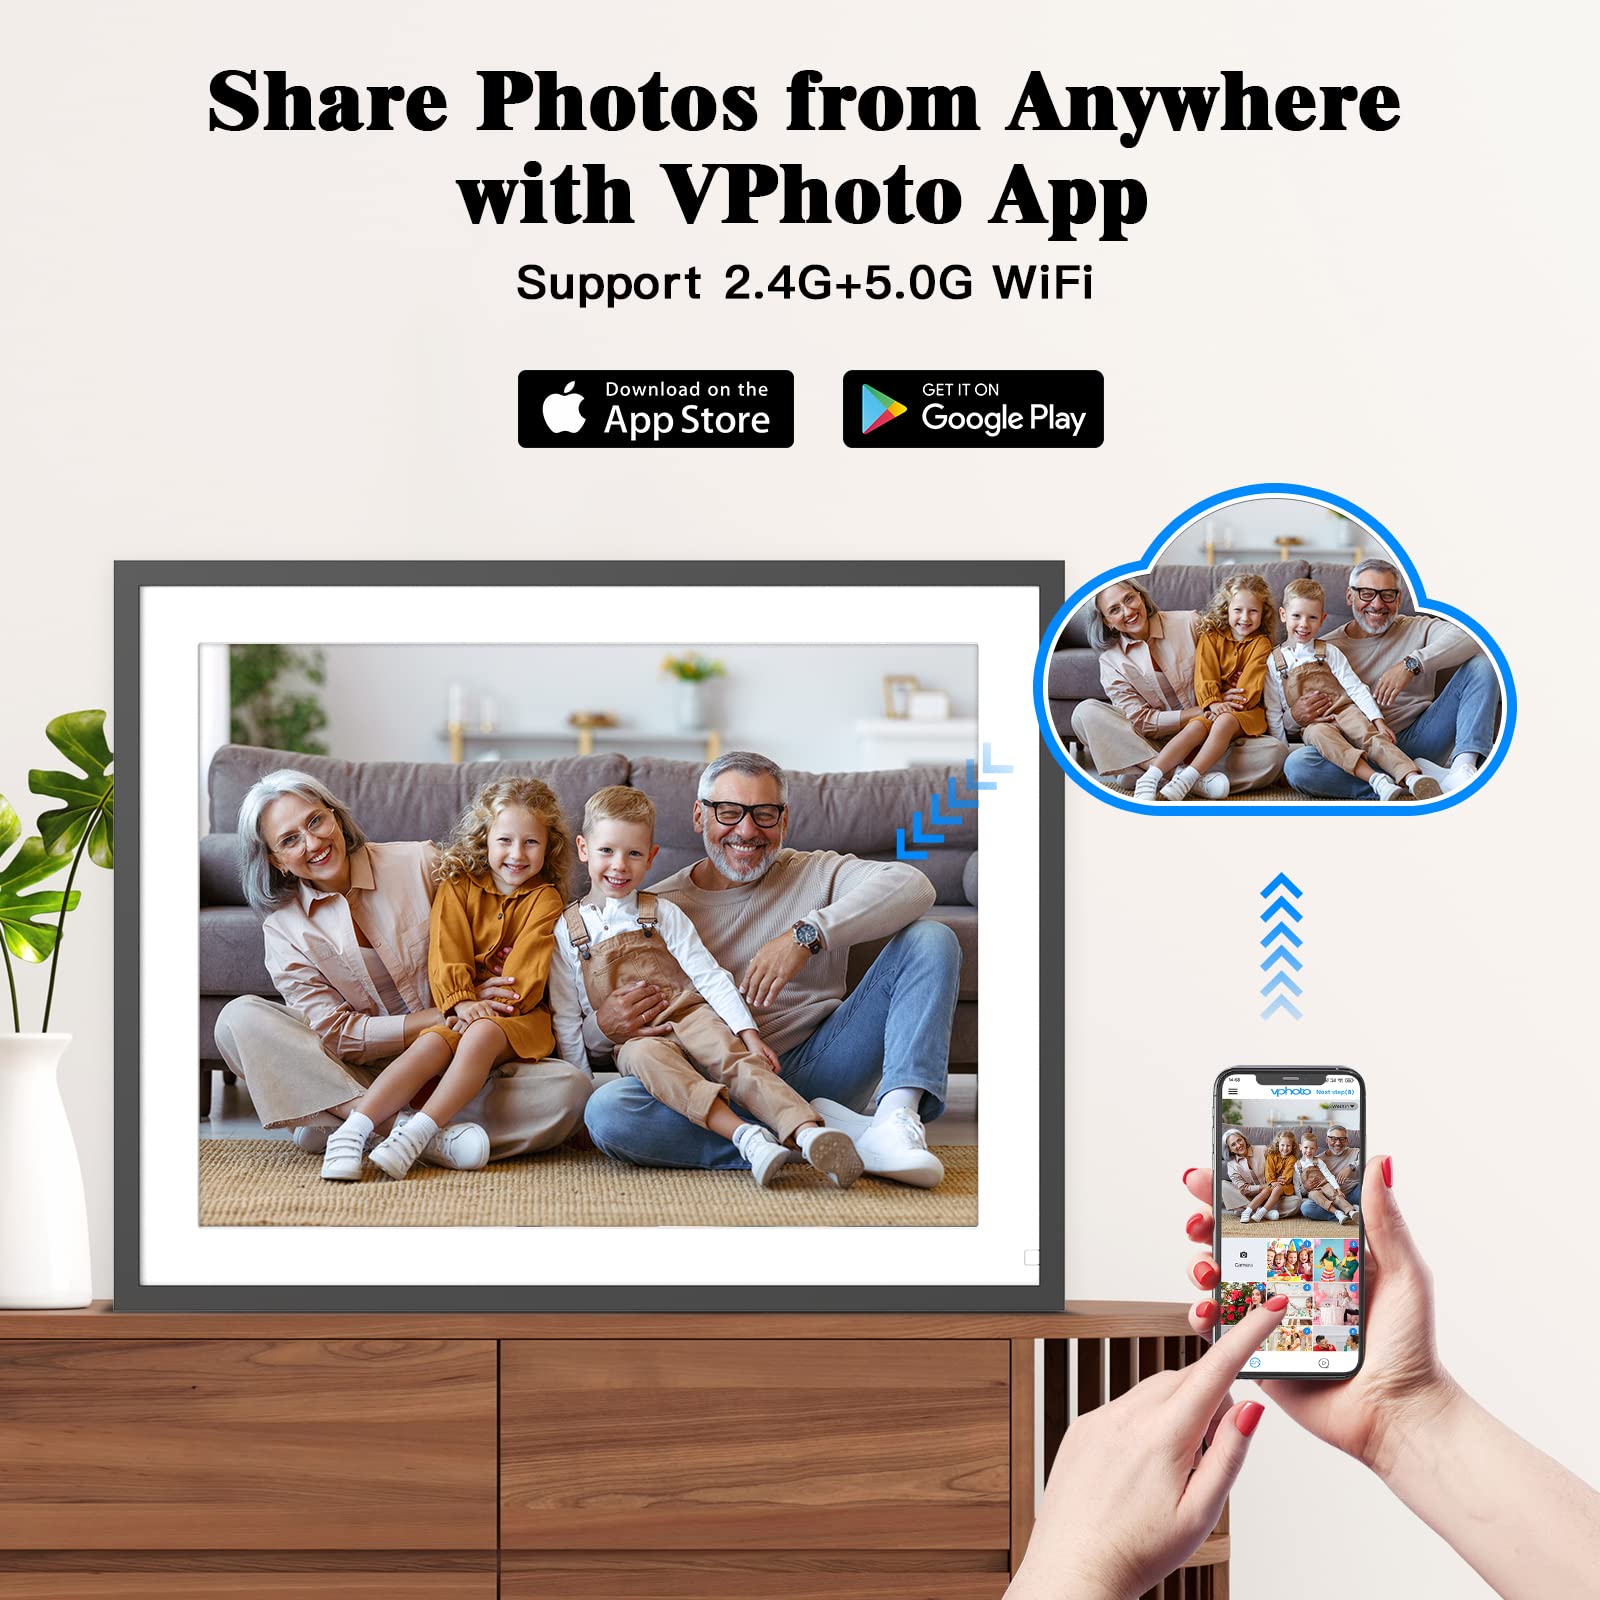 Large-Digital-Photo-Frame 32GB Electronic Photo Frame - 17-Inch Dual-WiFi Cloud Frame, FHD Touch Screen, Full Function, Auto-Rotate, Share Photos Video via App Email, Free Cloud, Gift for Grandparents